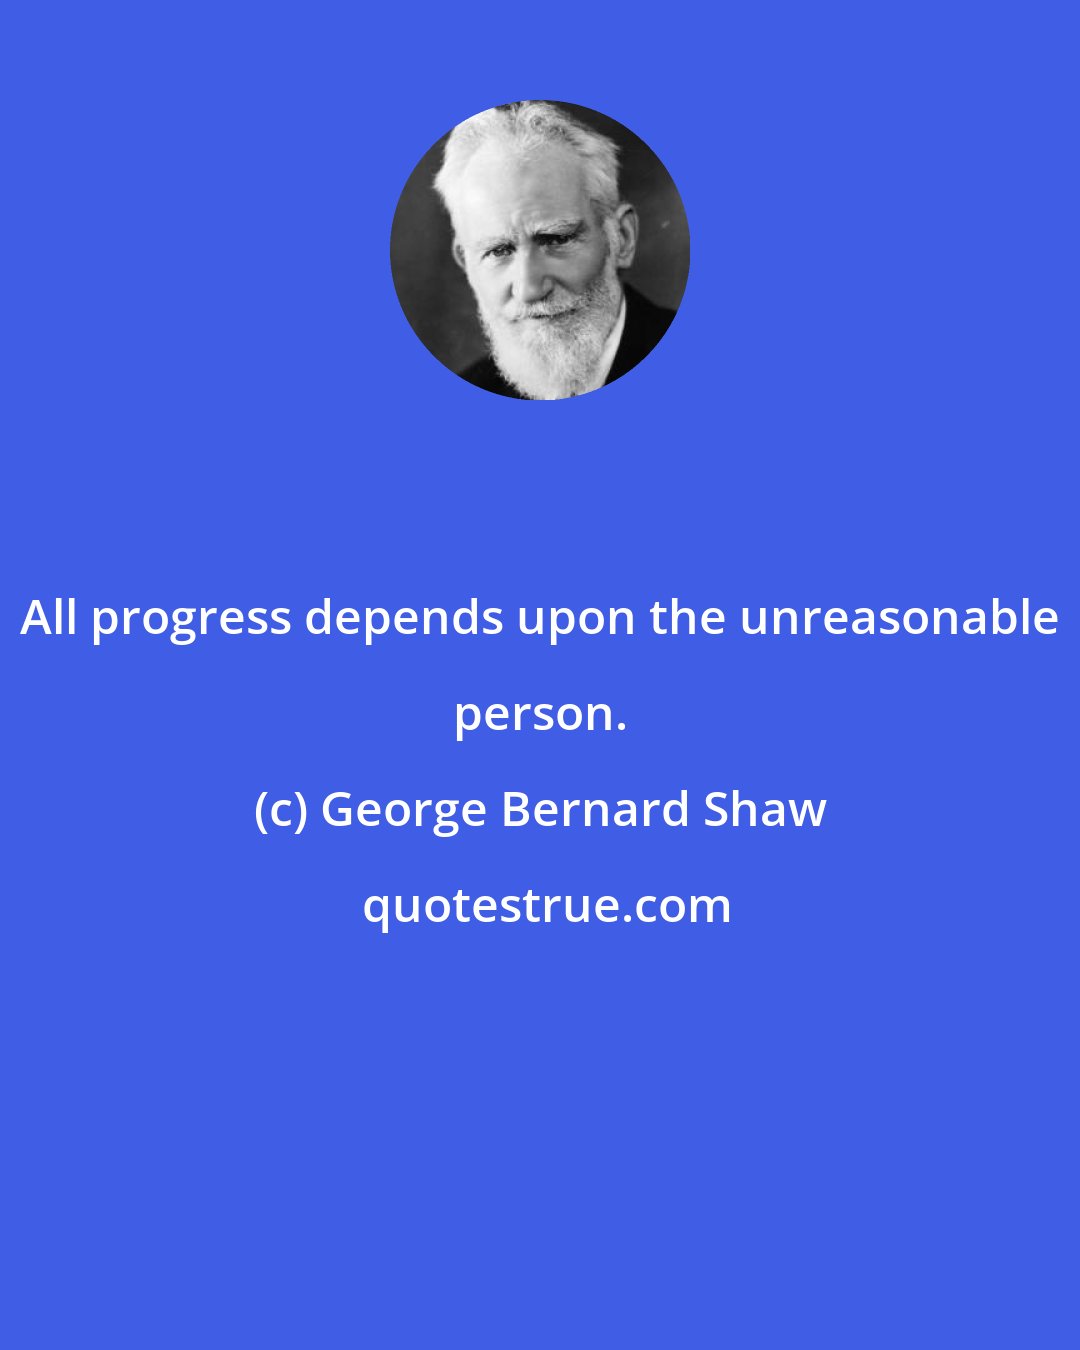 George Bernard Shaw: All progress depends upon the unreasonable person.